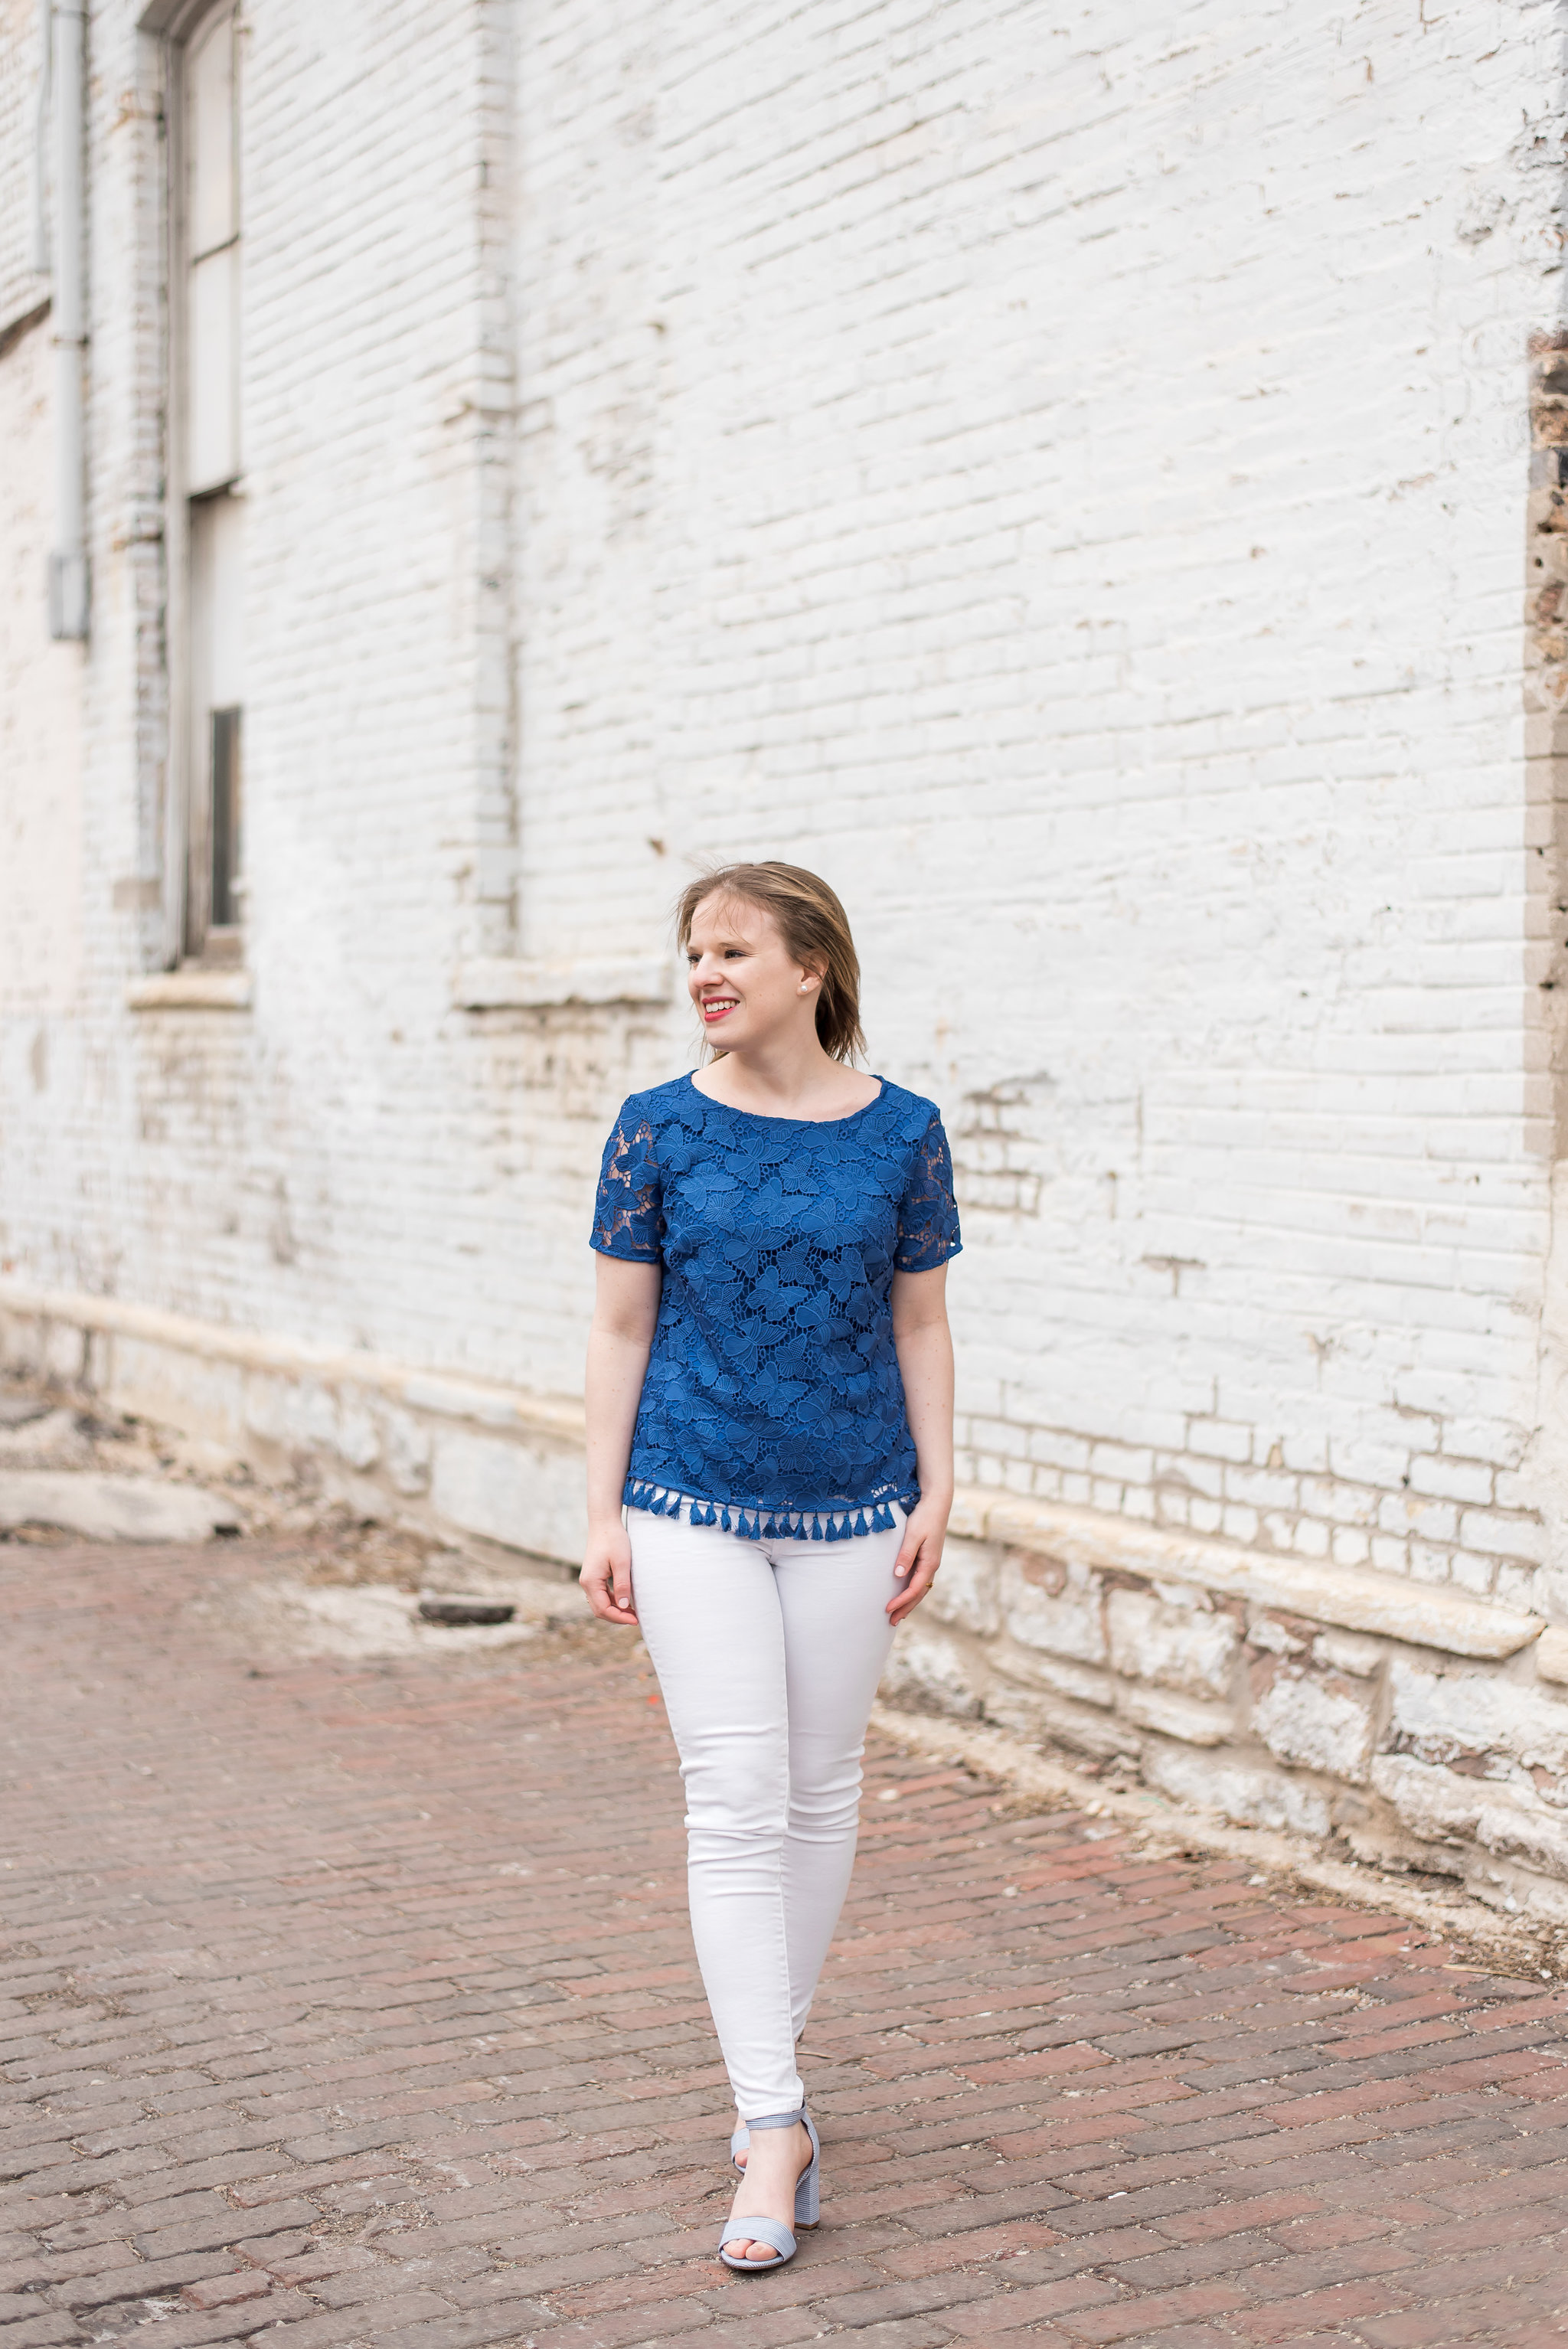 dc blogger woman wearing Talbots deep periwinkle top